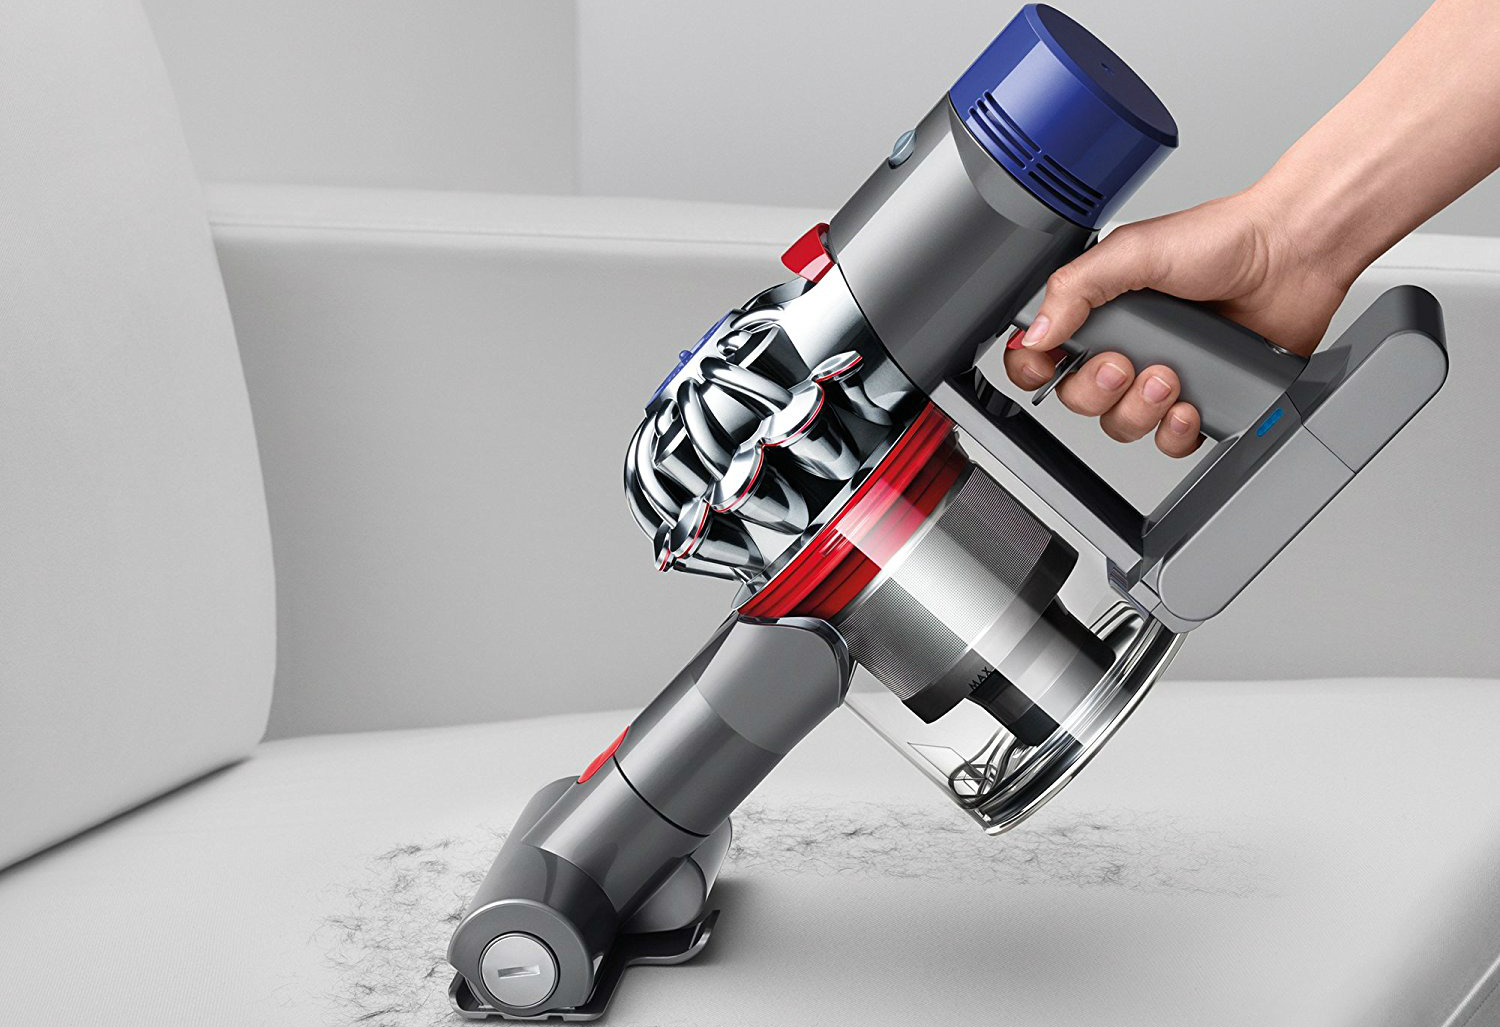 walmart price cuts on dyson cordless stick vacuums v8 absolute vacuum 4